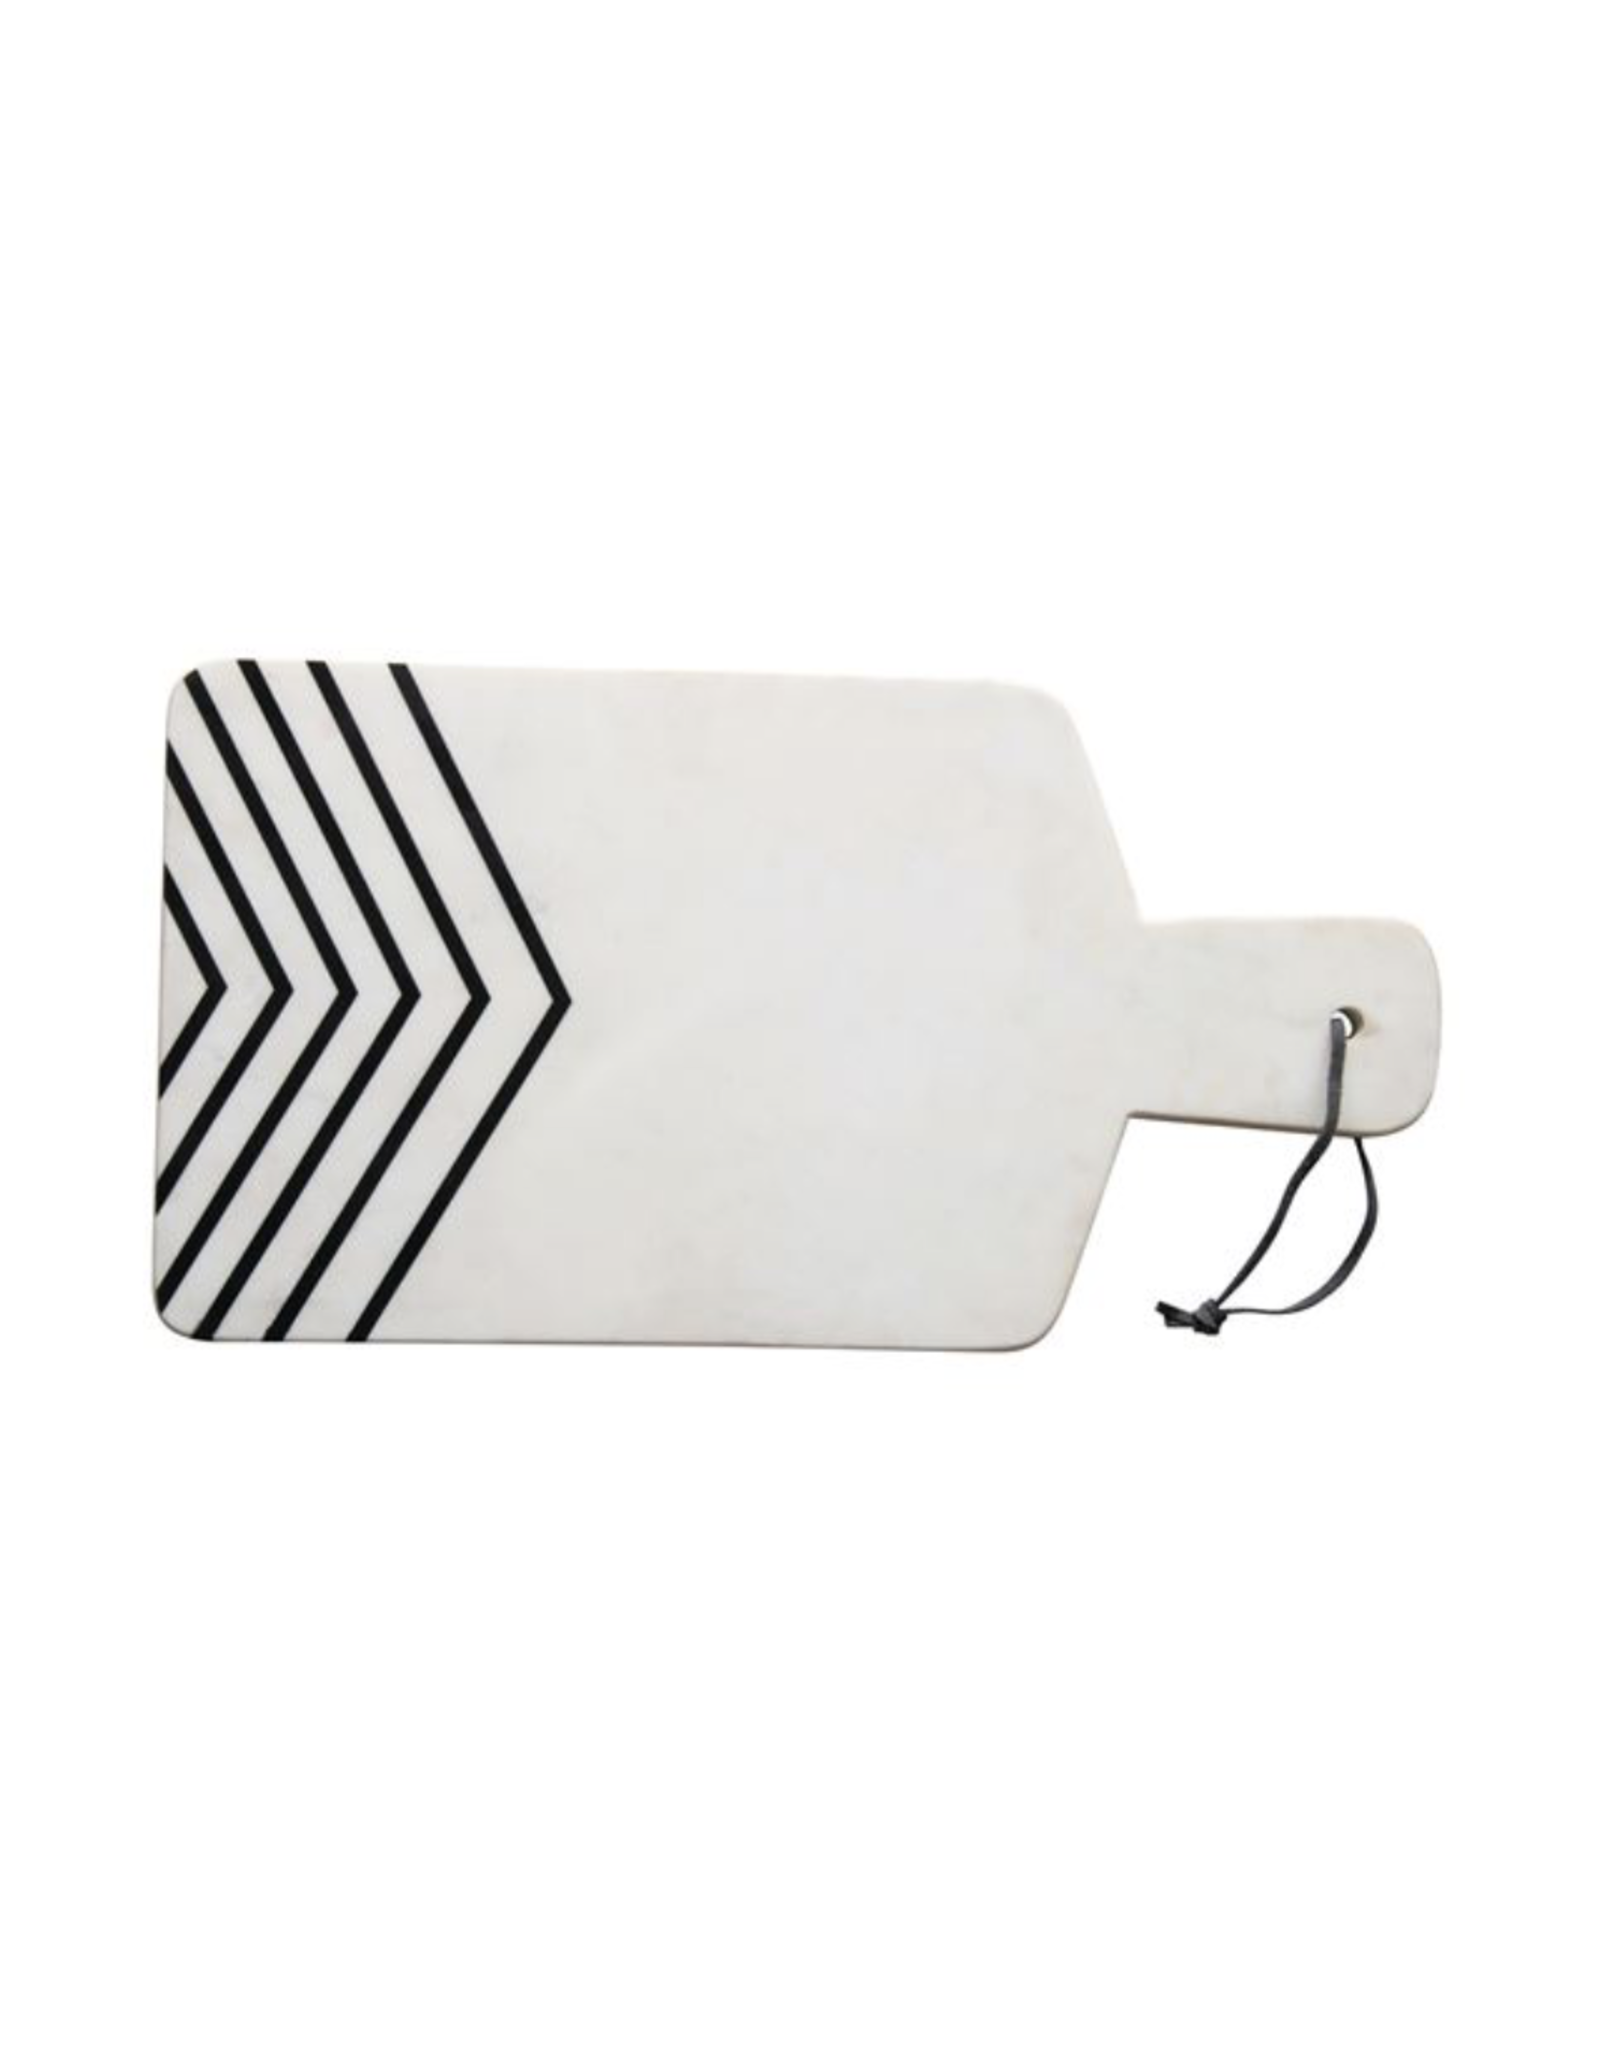 Bloomingville Marble Cheese/Cutting Board with White/Black Chevron